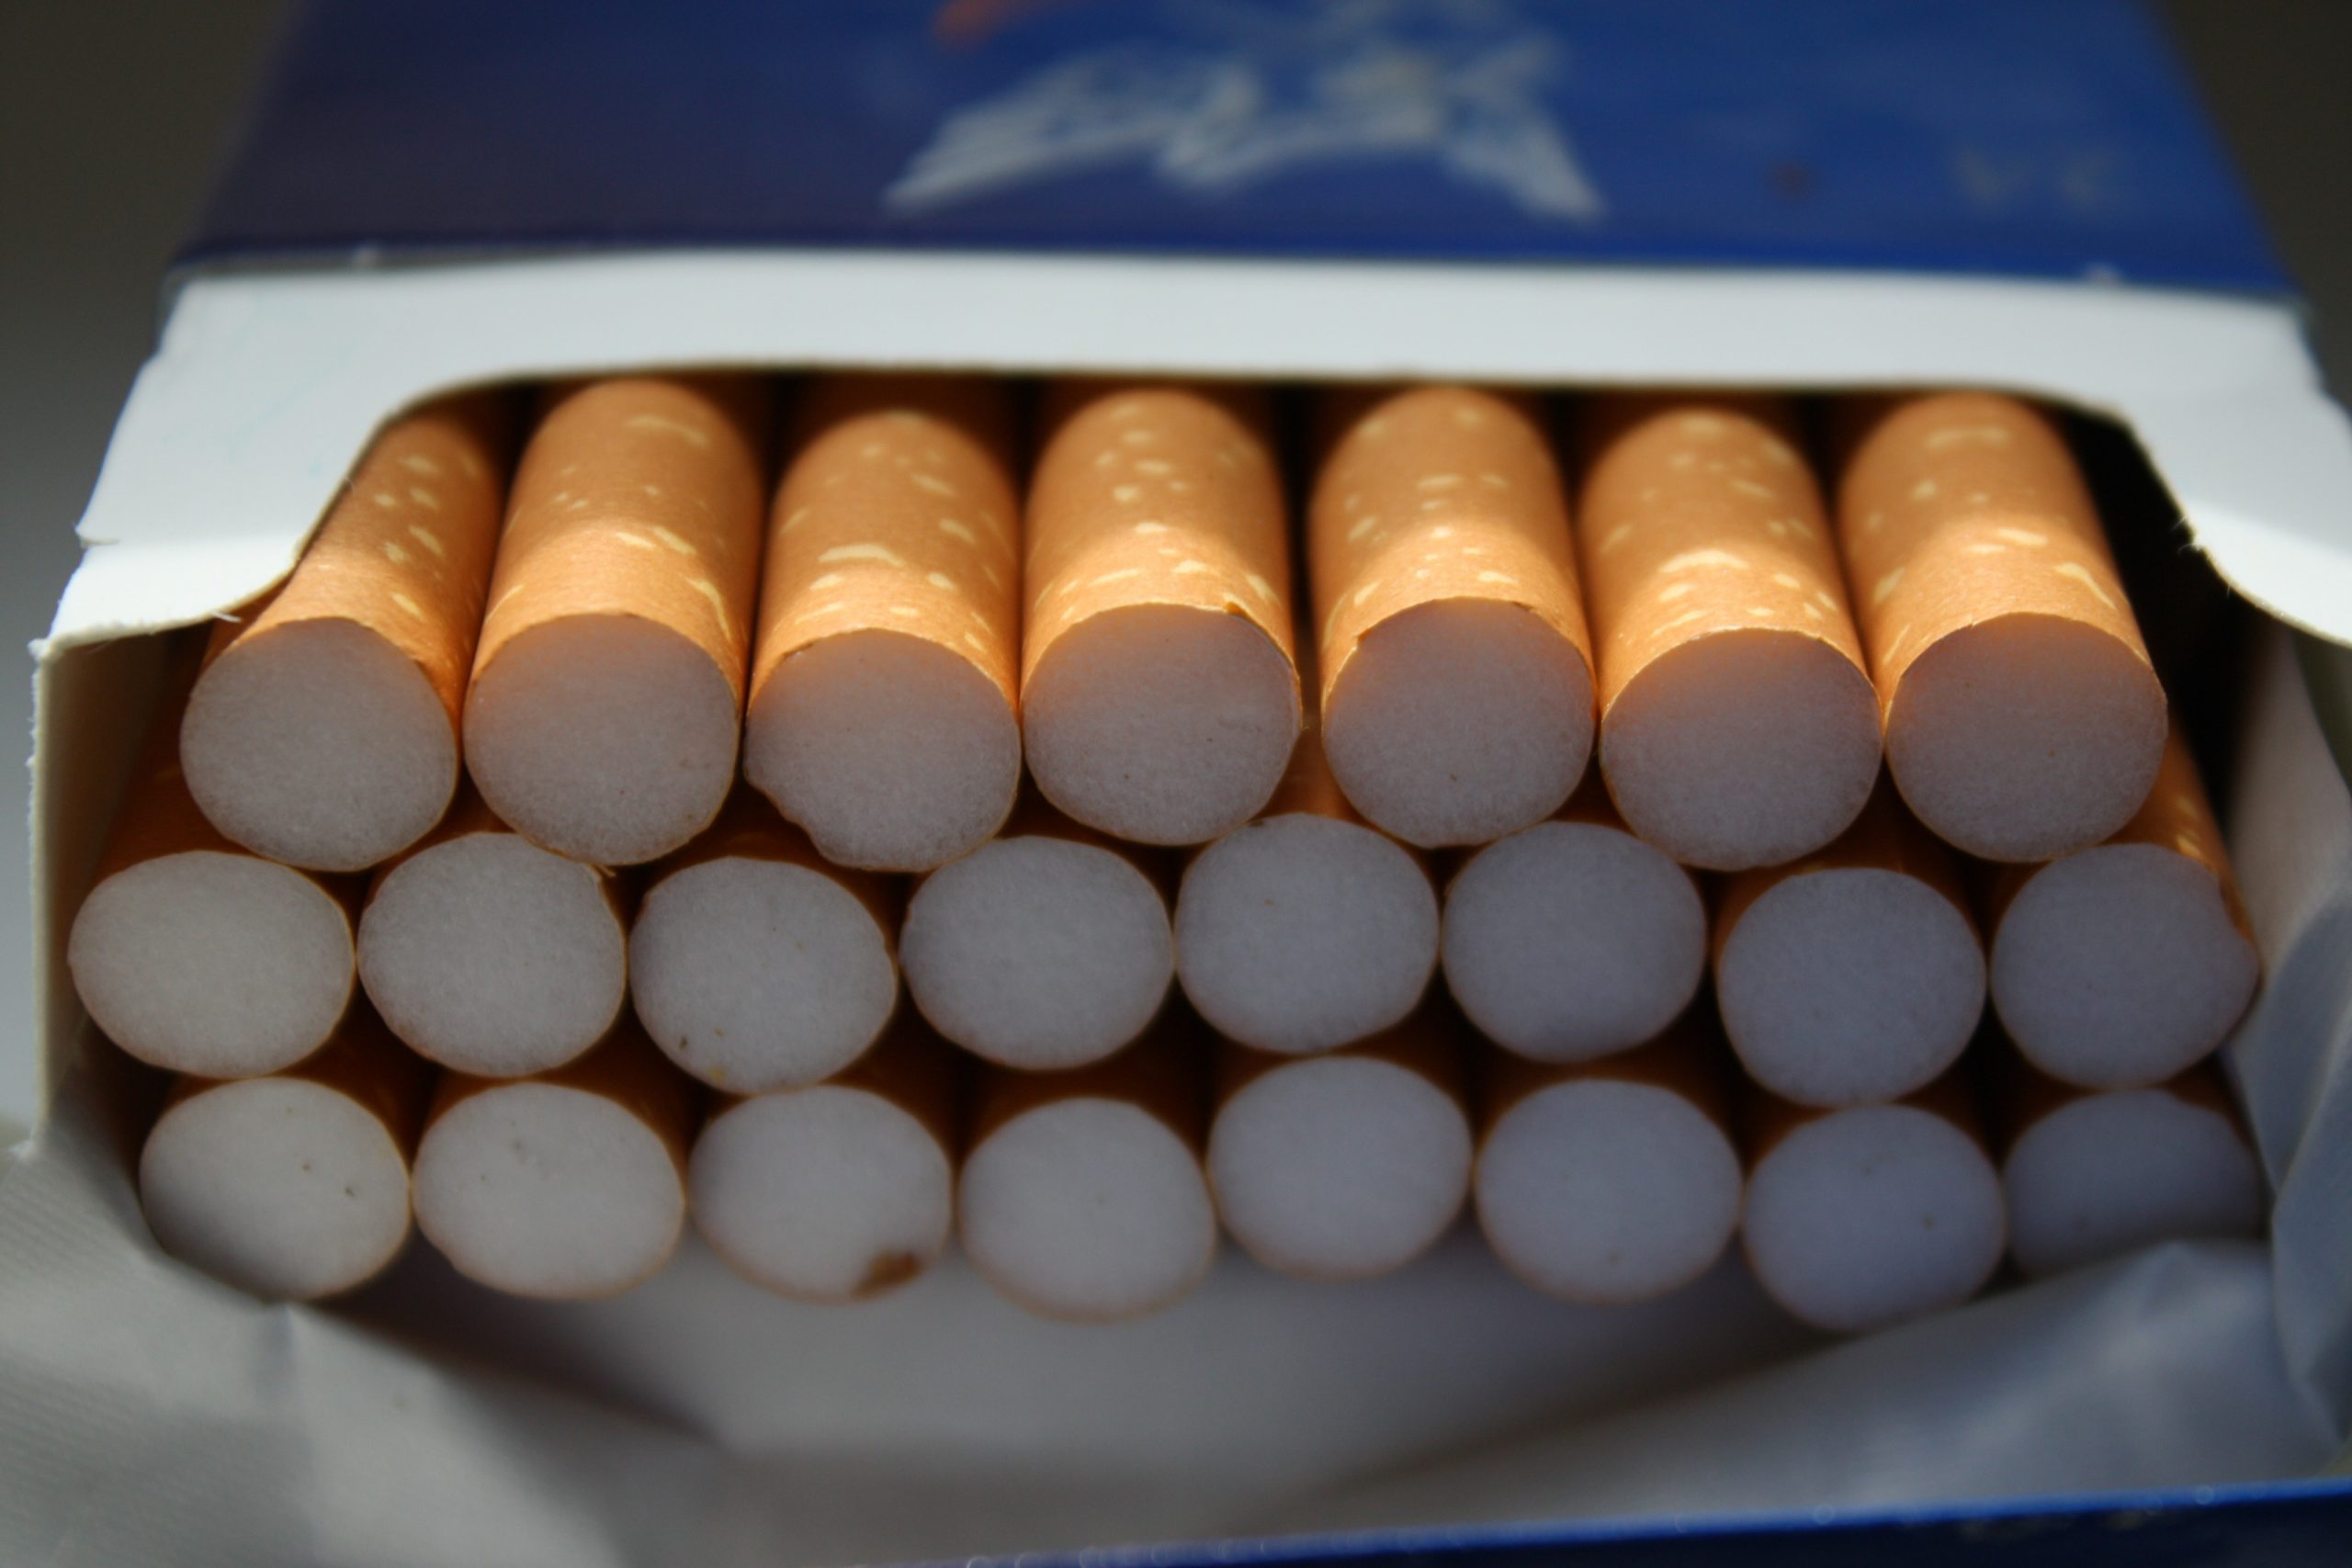 Police chief arrested for helping illegal cigarette manufacturing gang in Spain's Valencia area